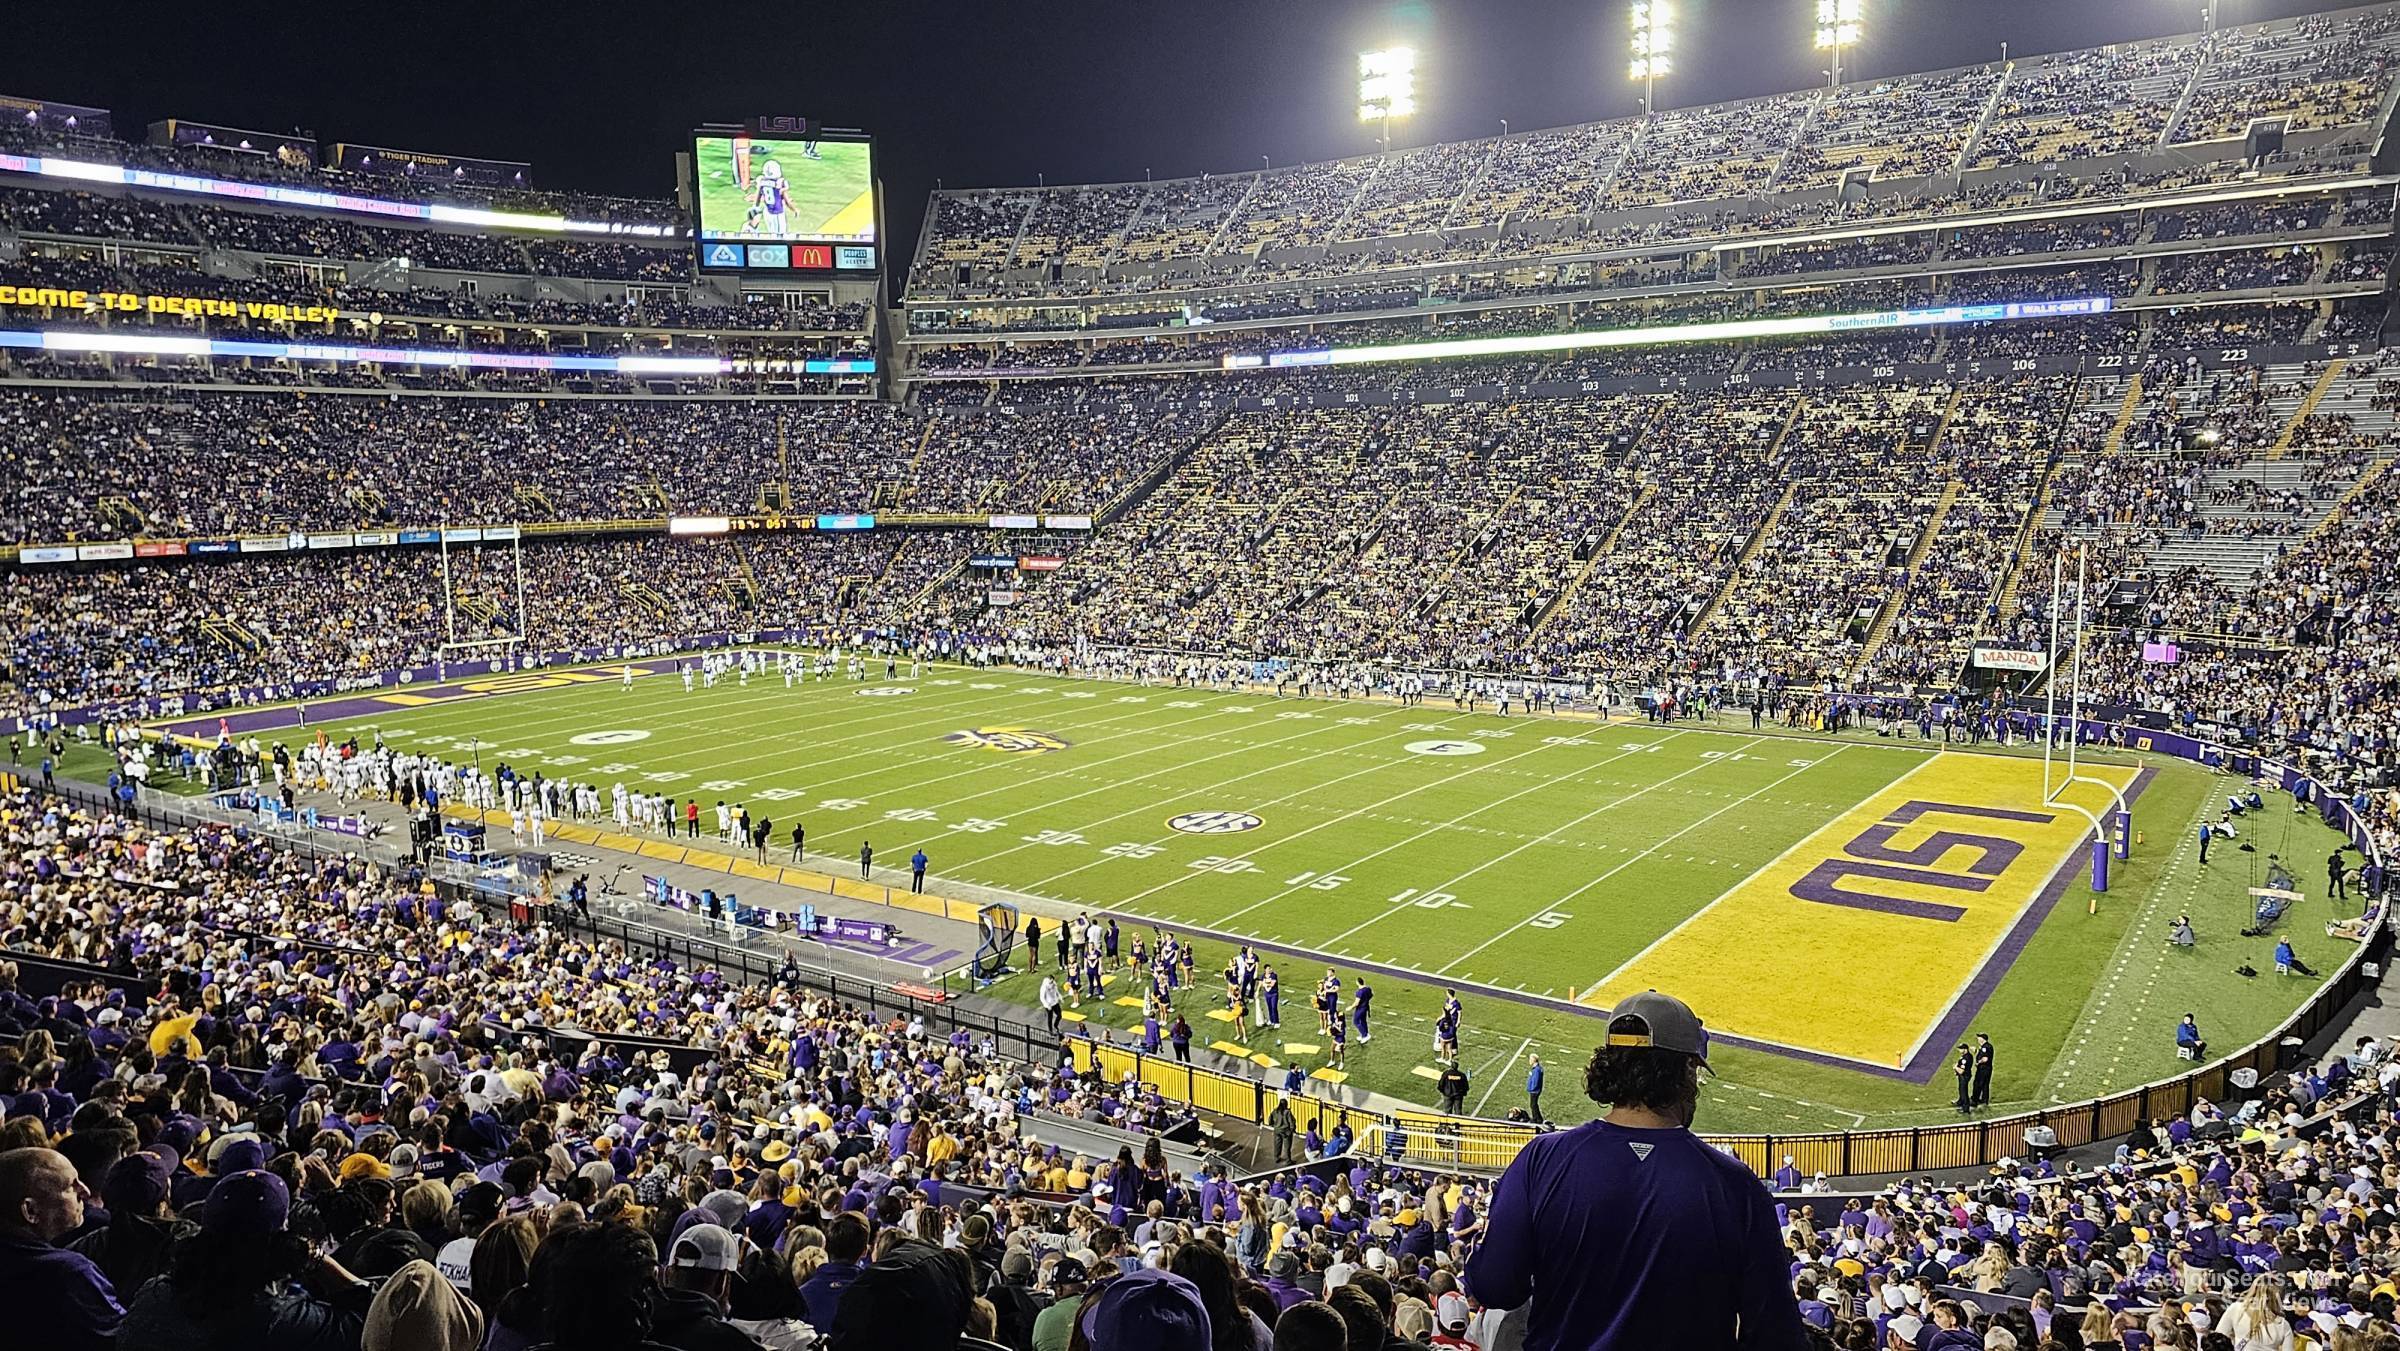 section 242, row 1 seat view  - tiger stadium